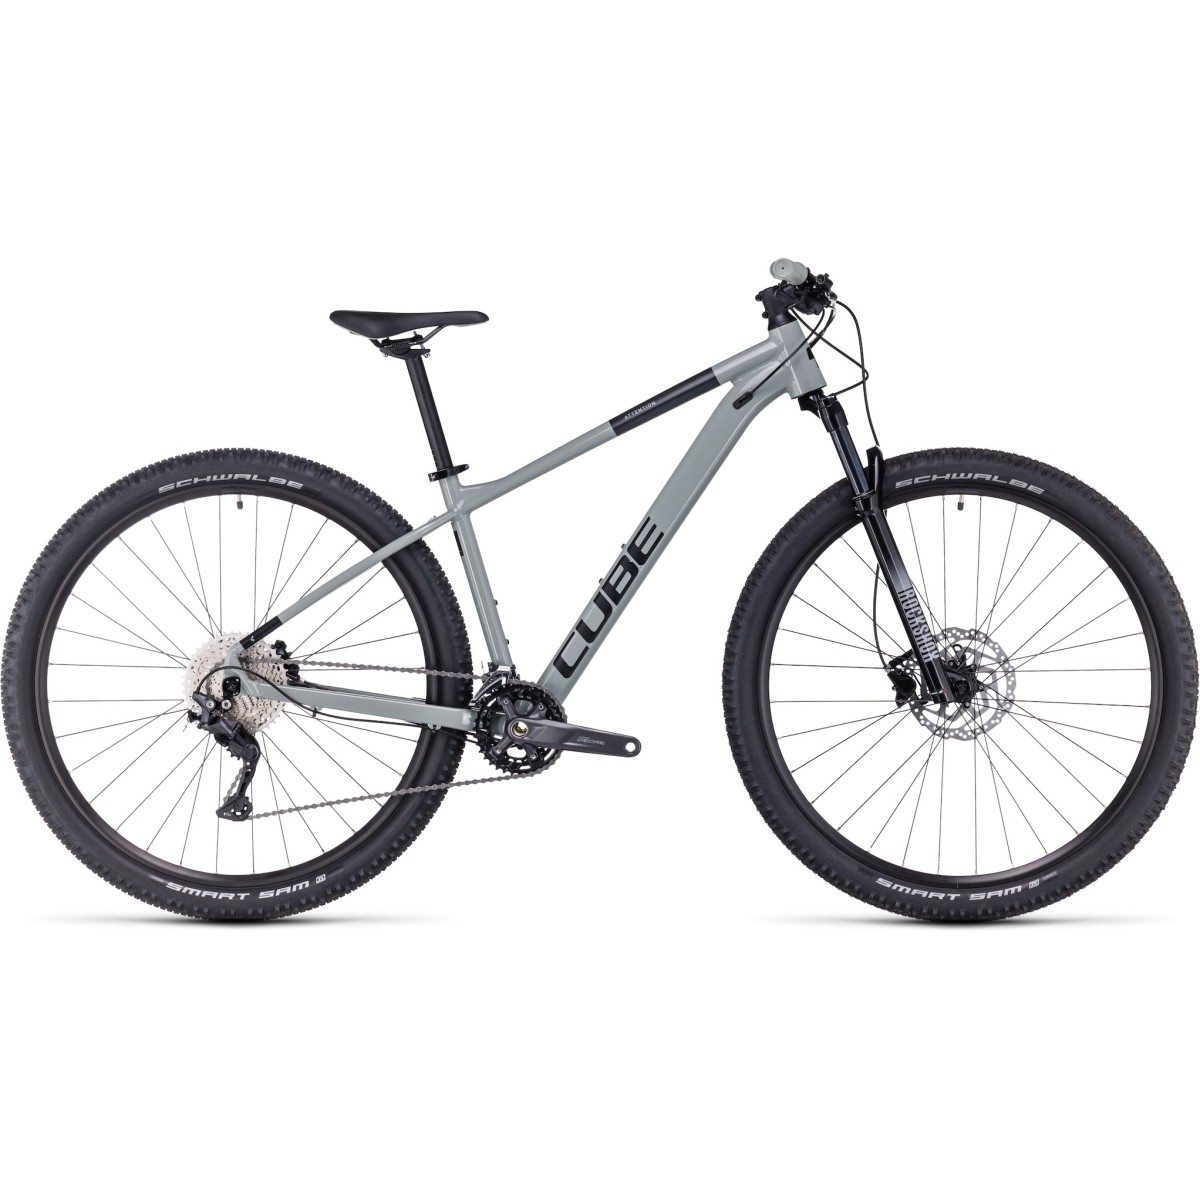 CUBE ATTENTION 29 mountain bike - swampgrey/black - 2023